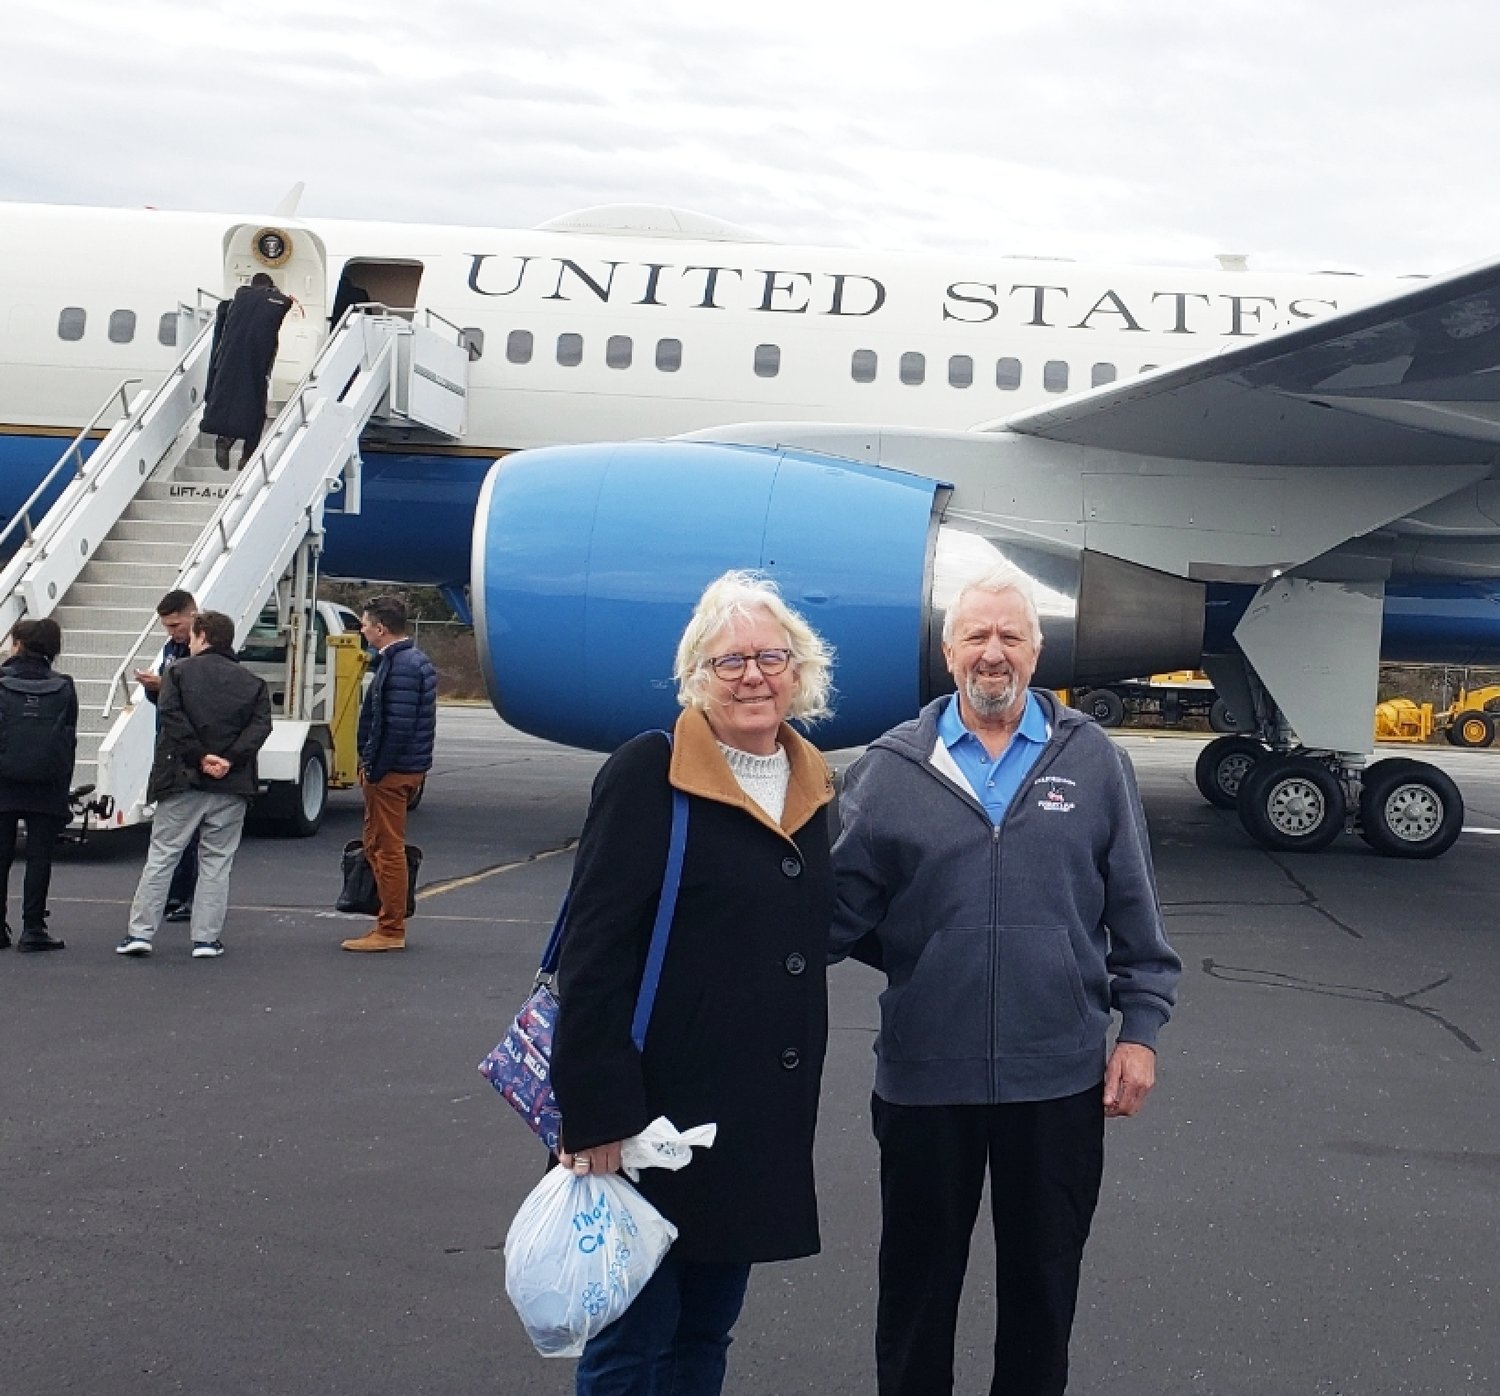 Bill and Kim Puder of Faregrounds Restaurant in front of Air Force One Sunday, just before greeting President Joe Biden and first lady Jill Biden. Bill Puder cooked numerous Thanksgiving dinners for the Biden family during their holiday visits to the island that date back to the mid-1970s when Joe Biden was a senator from Delaware.